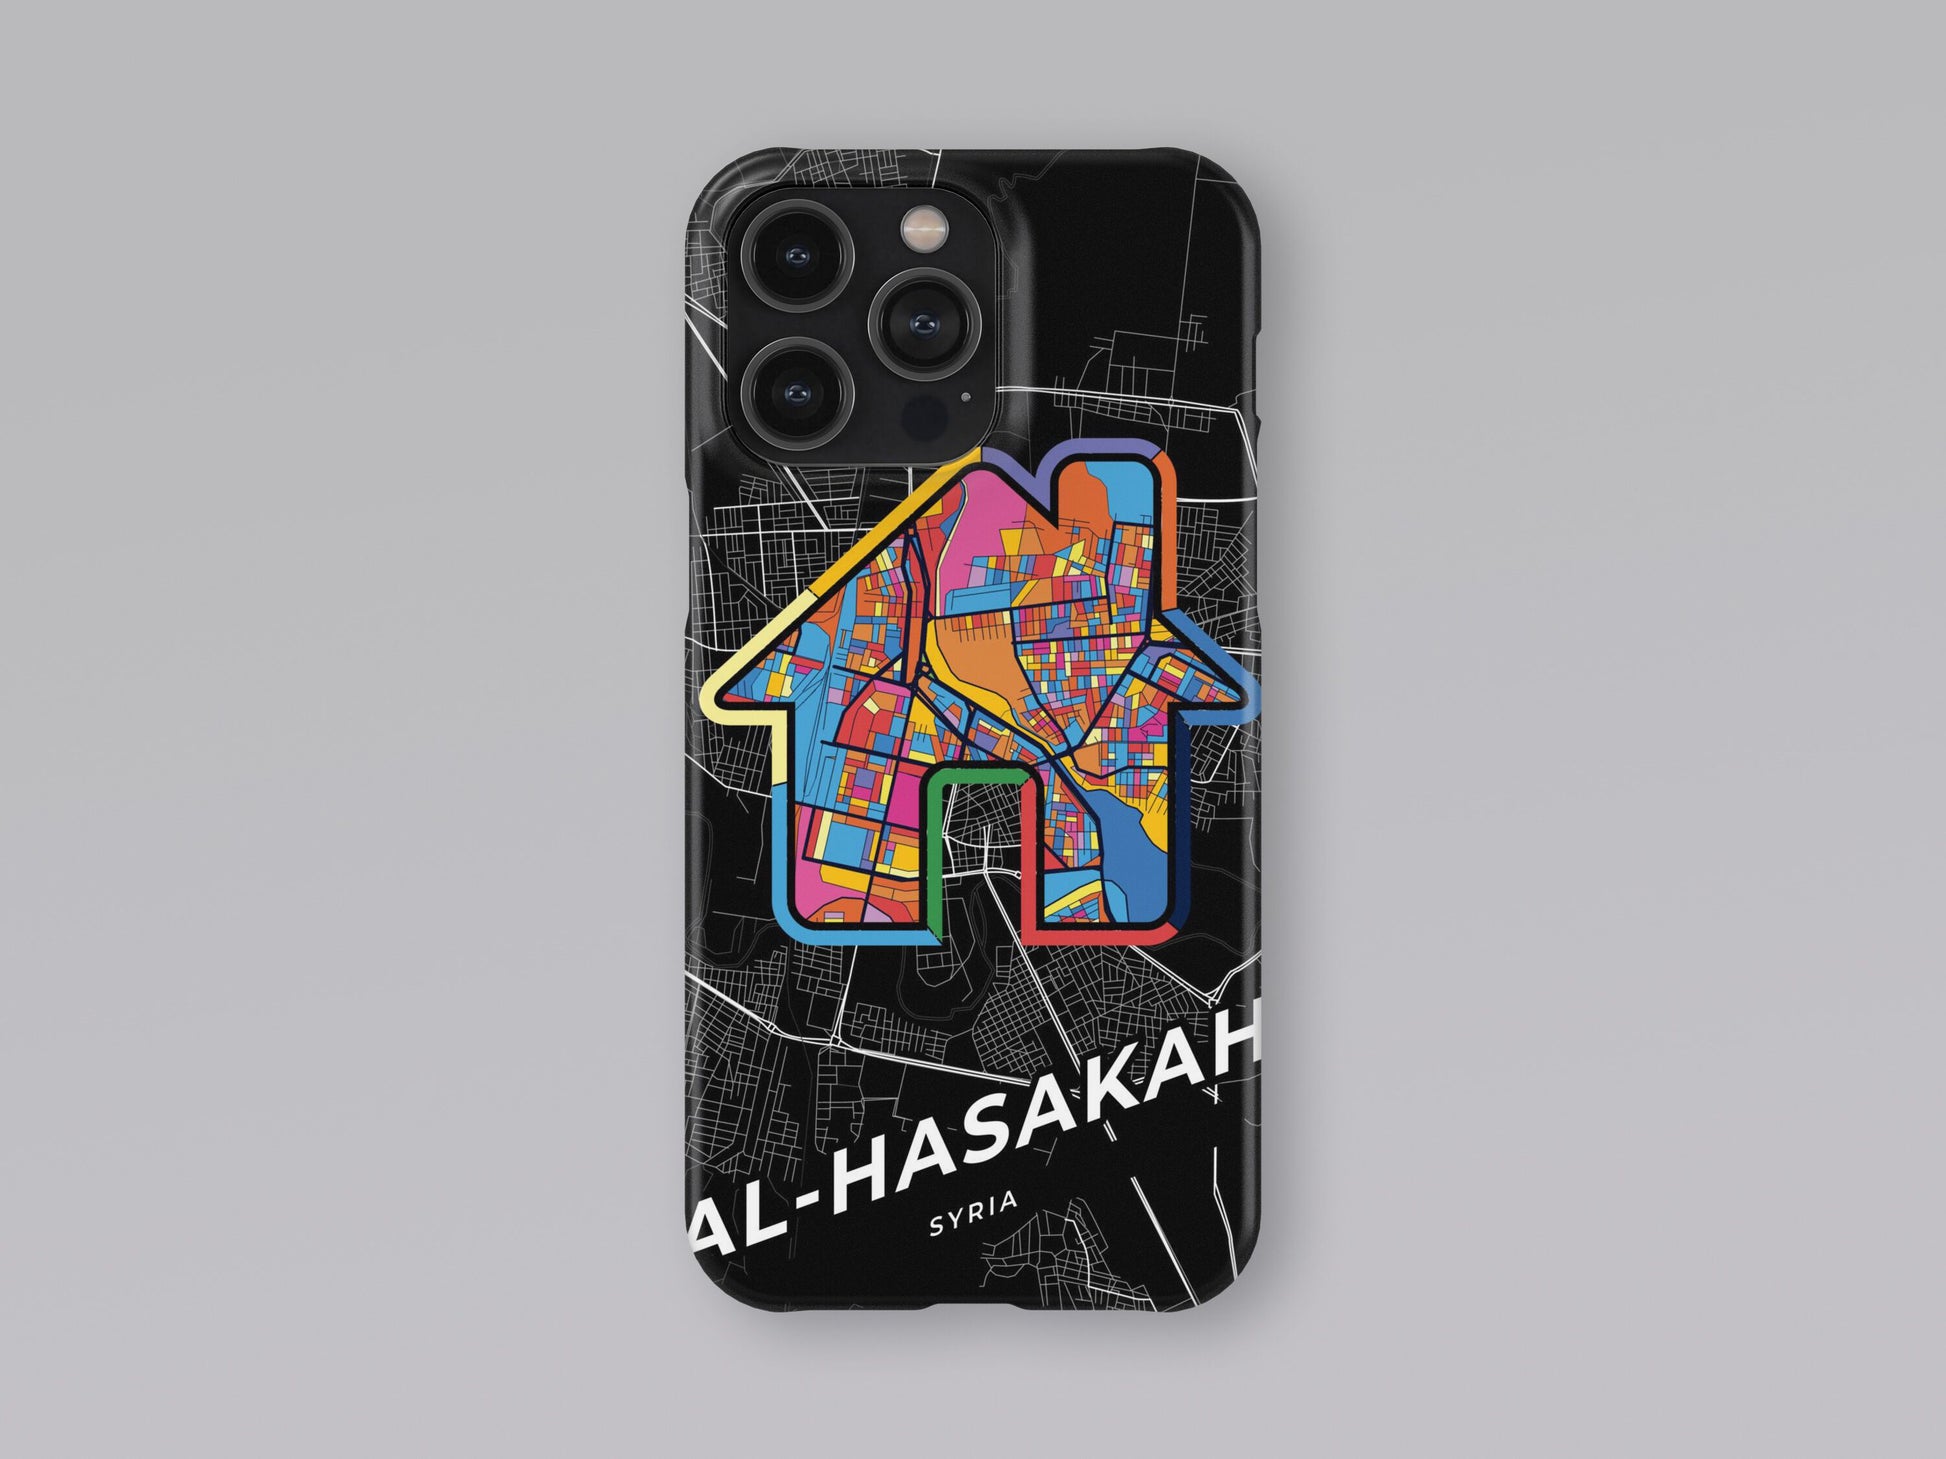 Al-Hasakah Syria slim phone case with colorful icon. Birthday, wedding or housewarming gift. Couple match cases. 3